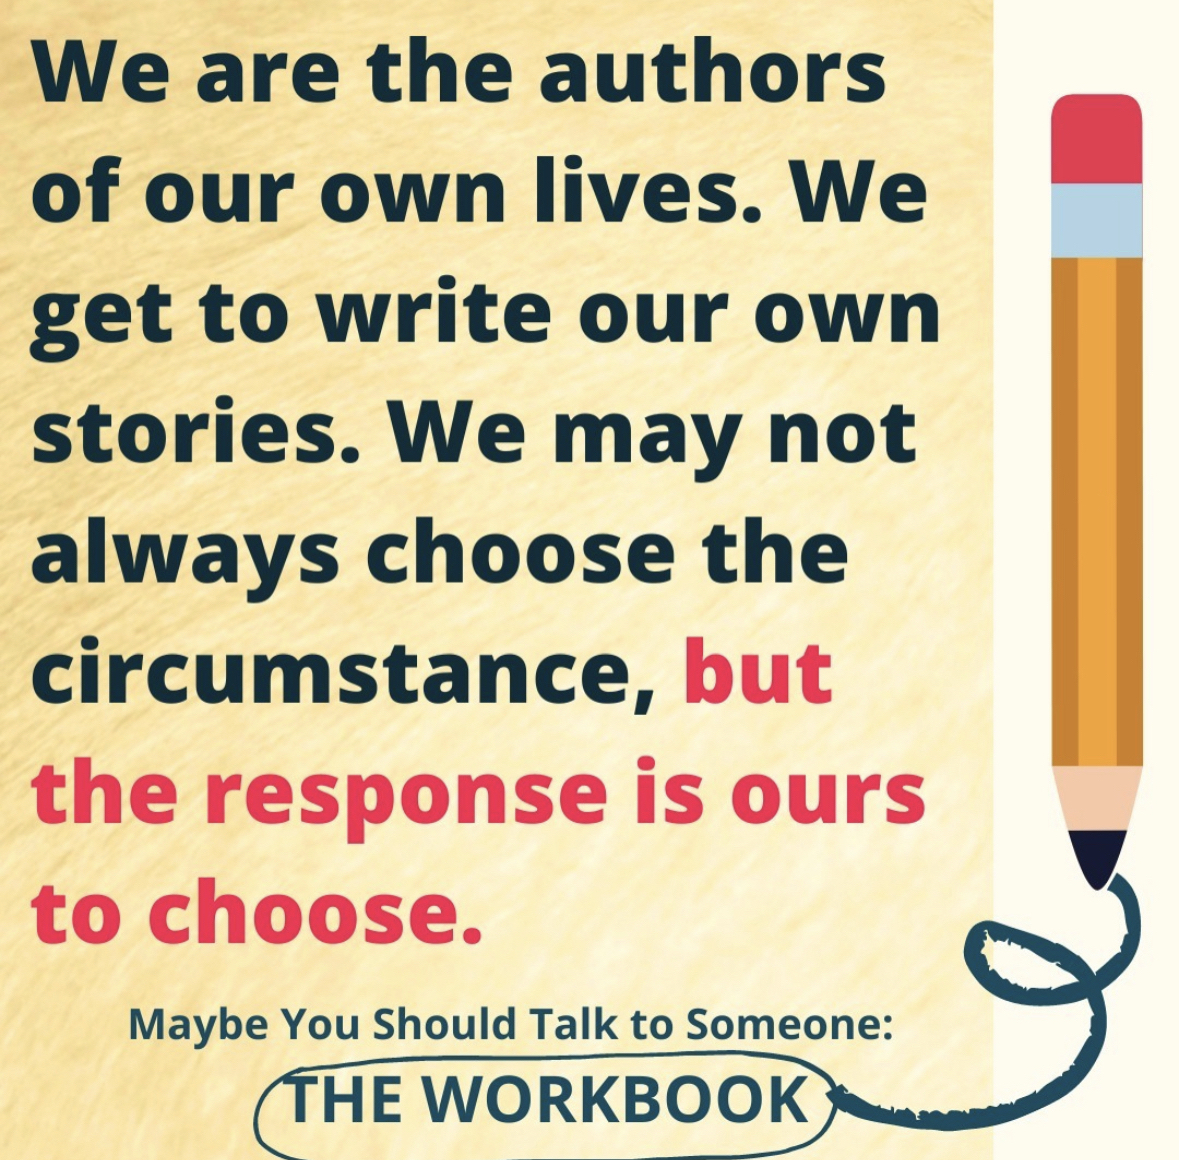 “We get to write our own stories.” Need some guidance to do this? Start working through the #MYSTTS workbook this weekend🥰➡️ amzn.to/3uzmaPs